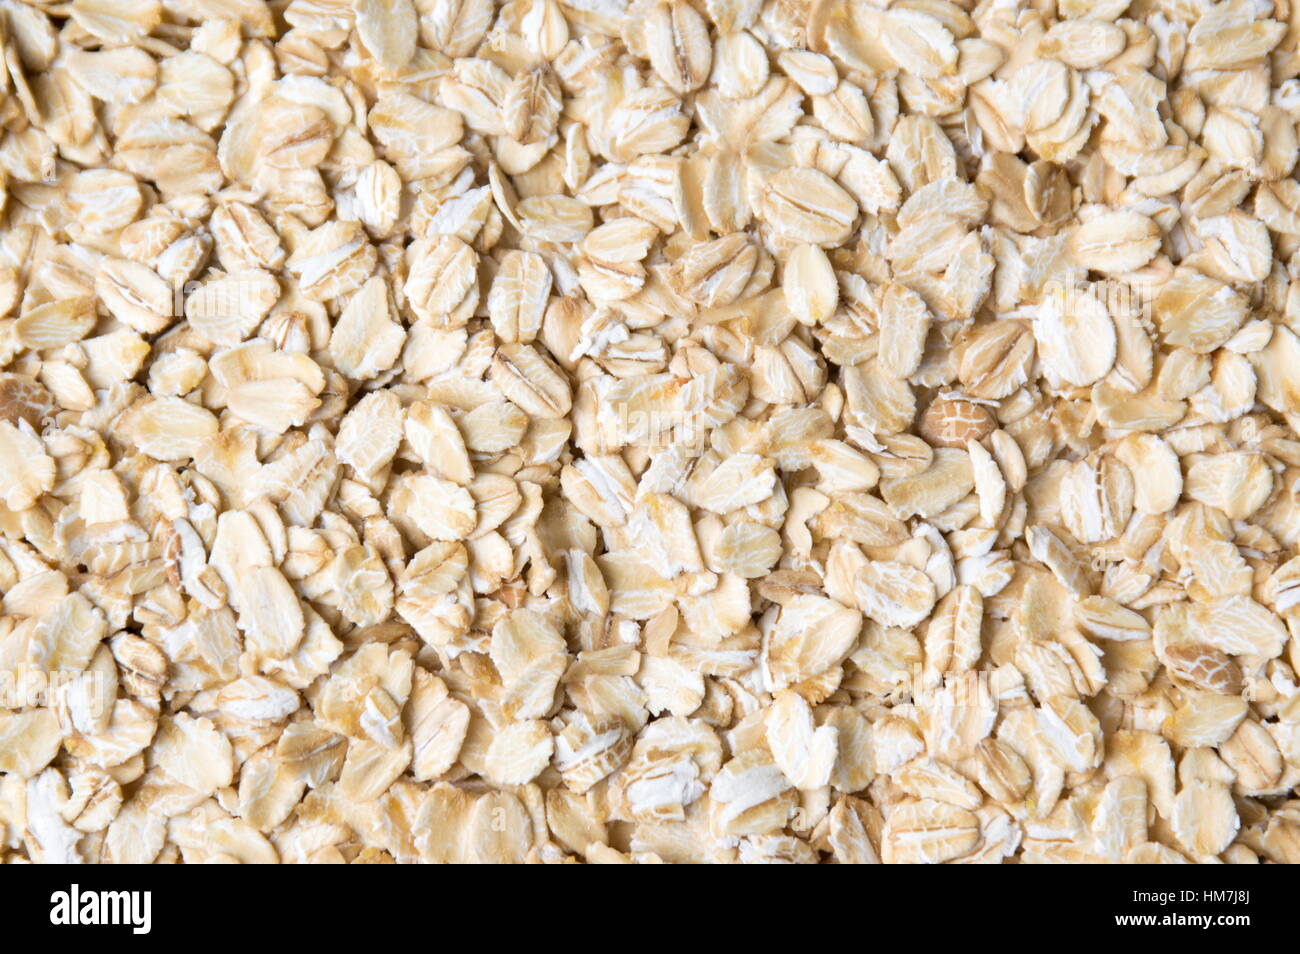 Bunch of oat flakes forming a background pattern Stock Photo